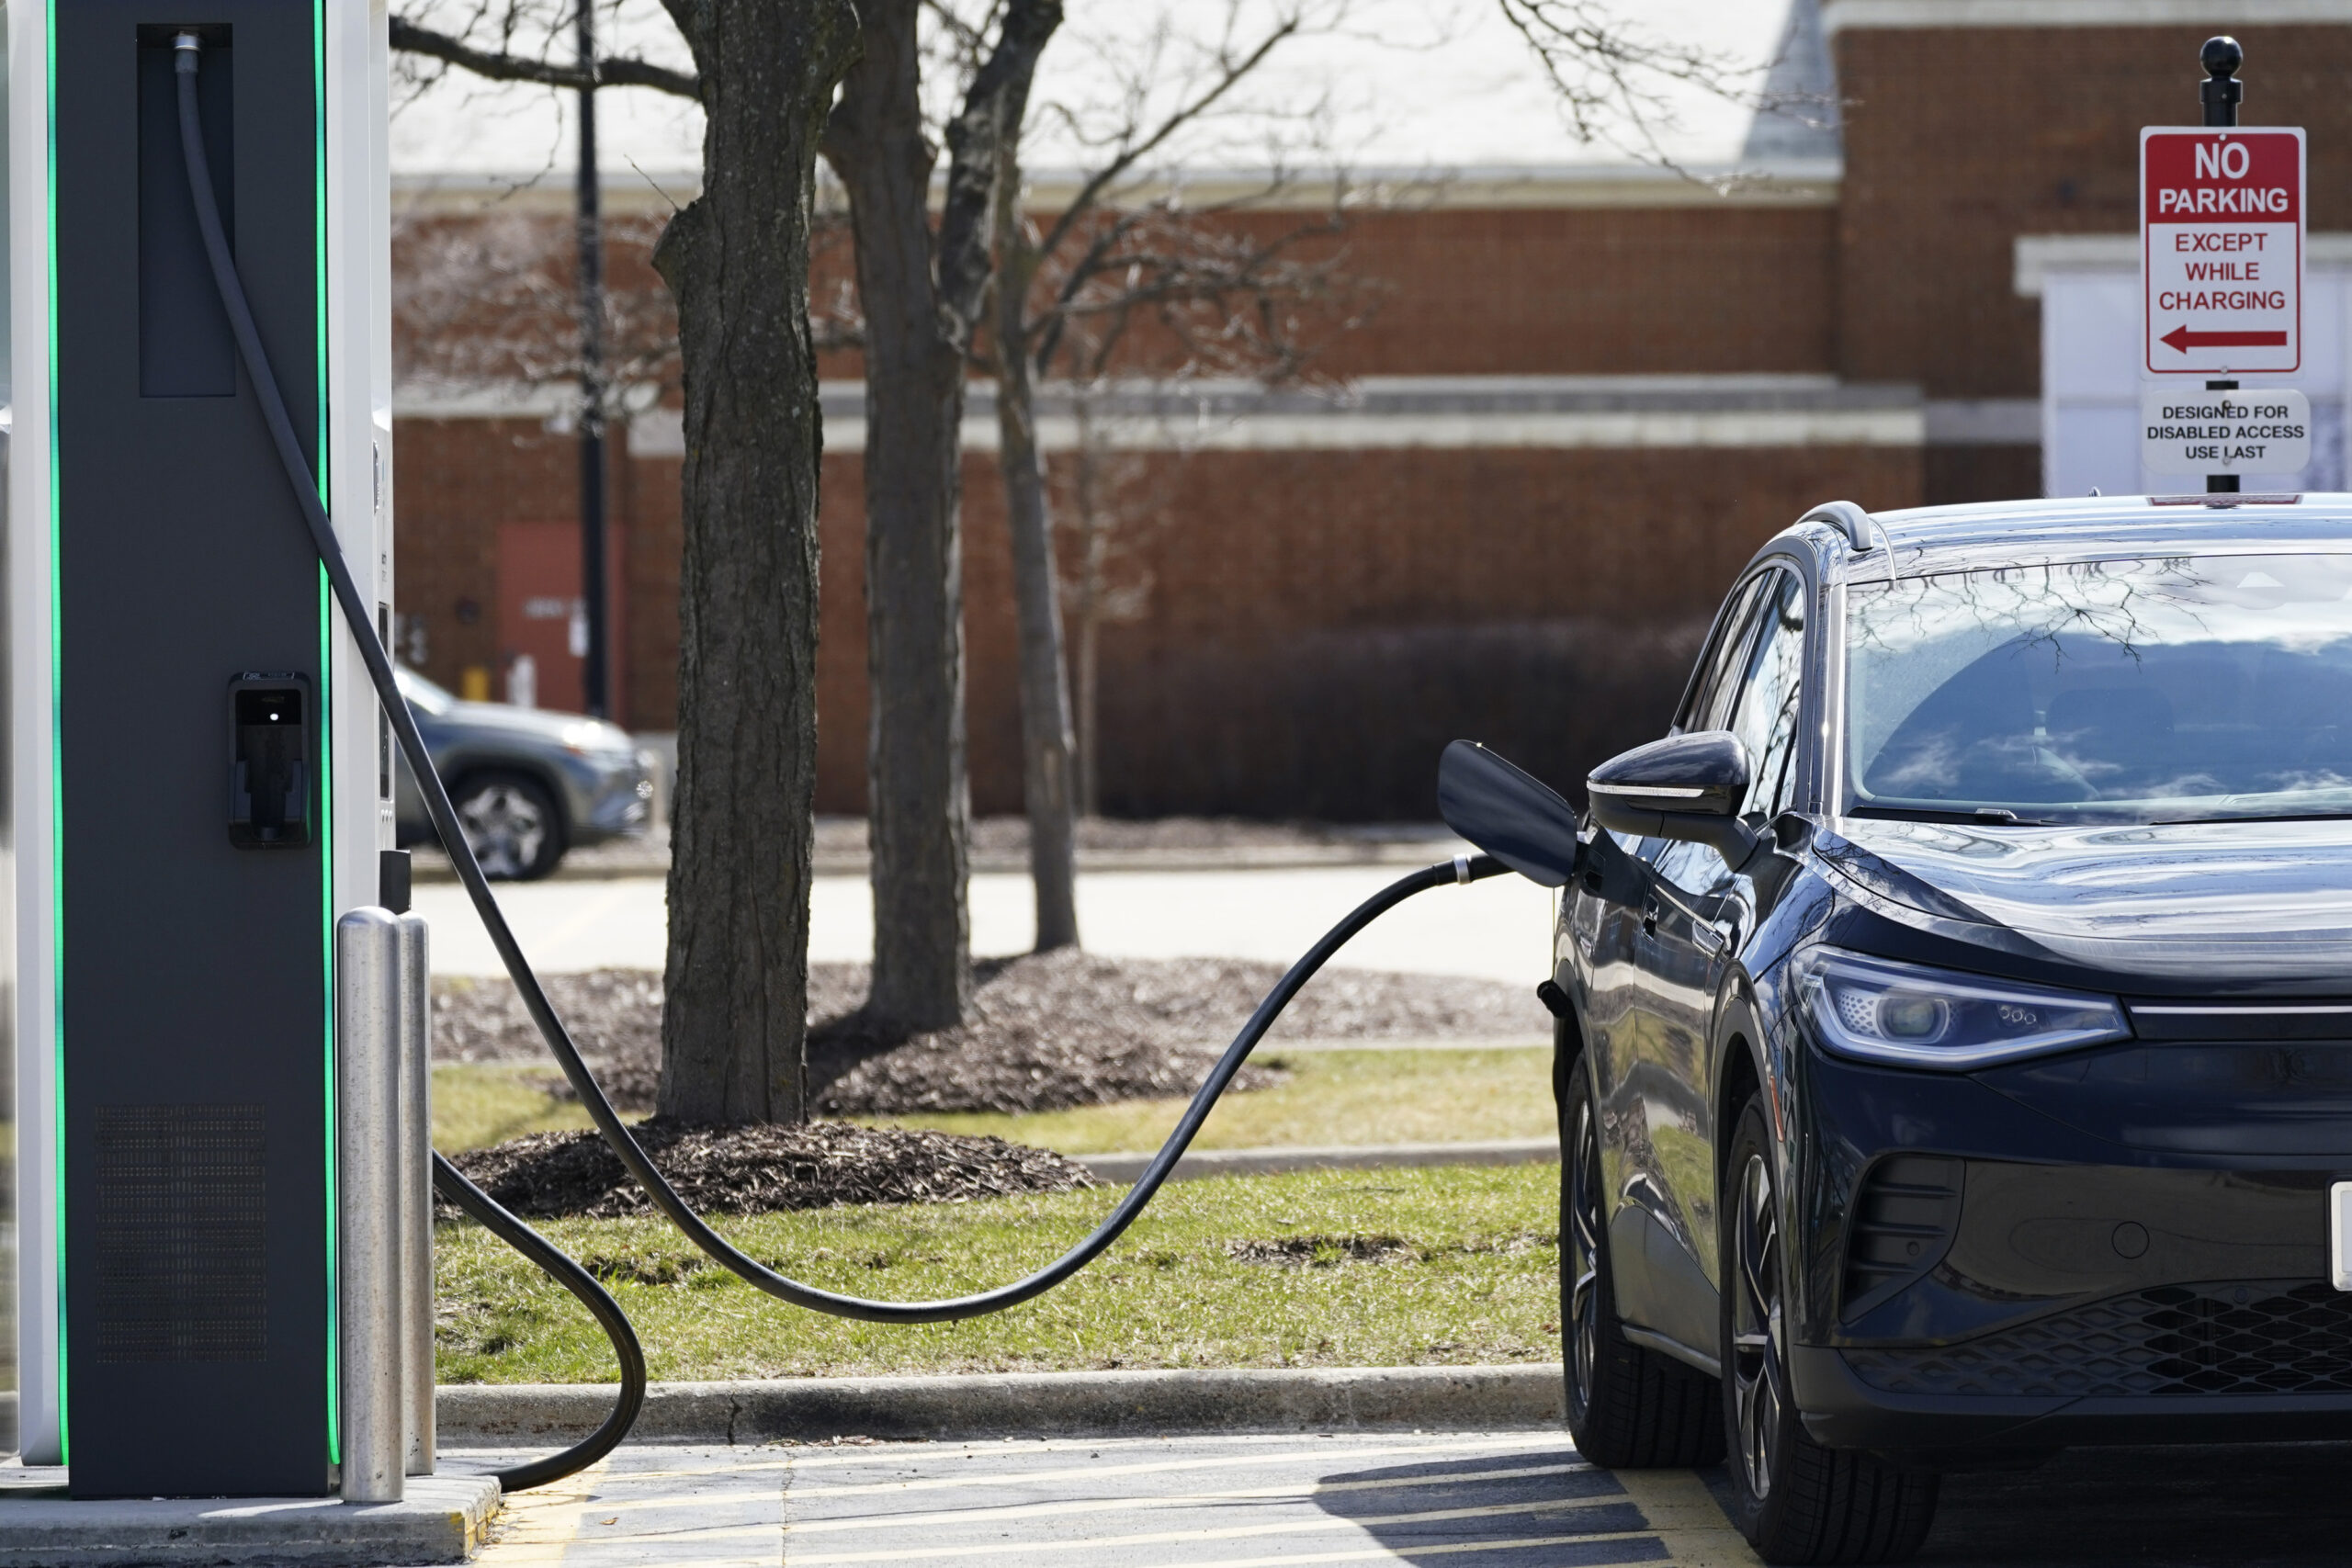 Higher gas prices, concern for environment and more variety drives interest in electric vehicles